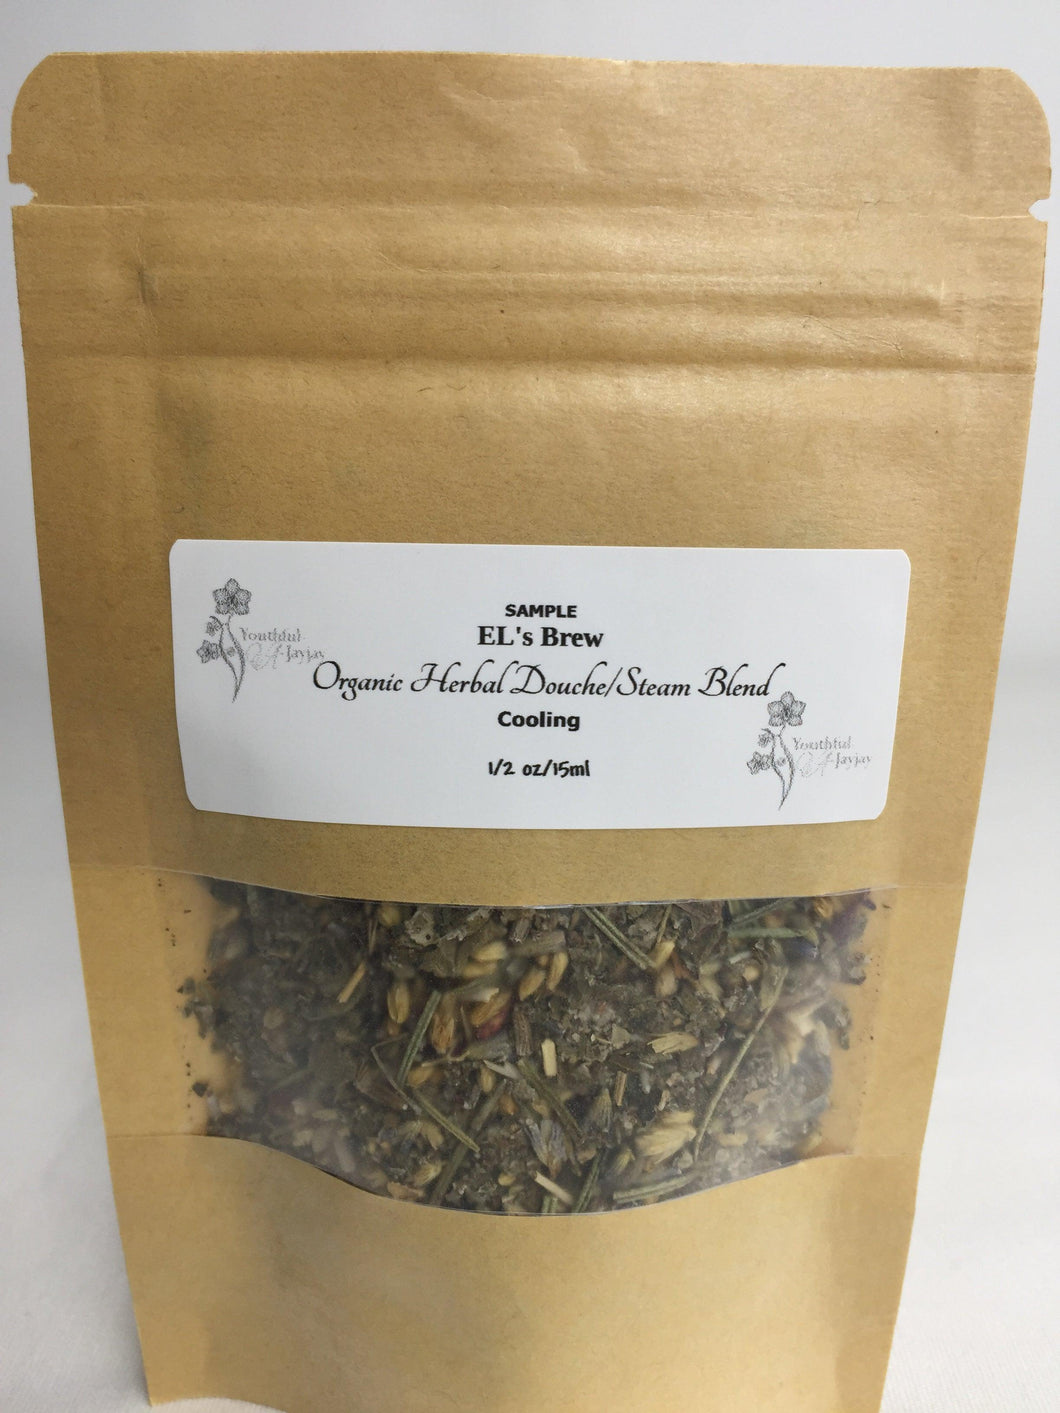 EL's Brew: Organic Herbal Steam/Douche Blend Sample Size, COOLING 1/2oz. - Image #1